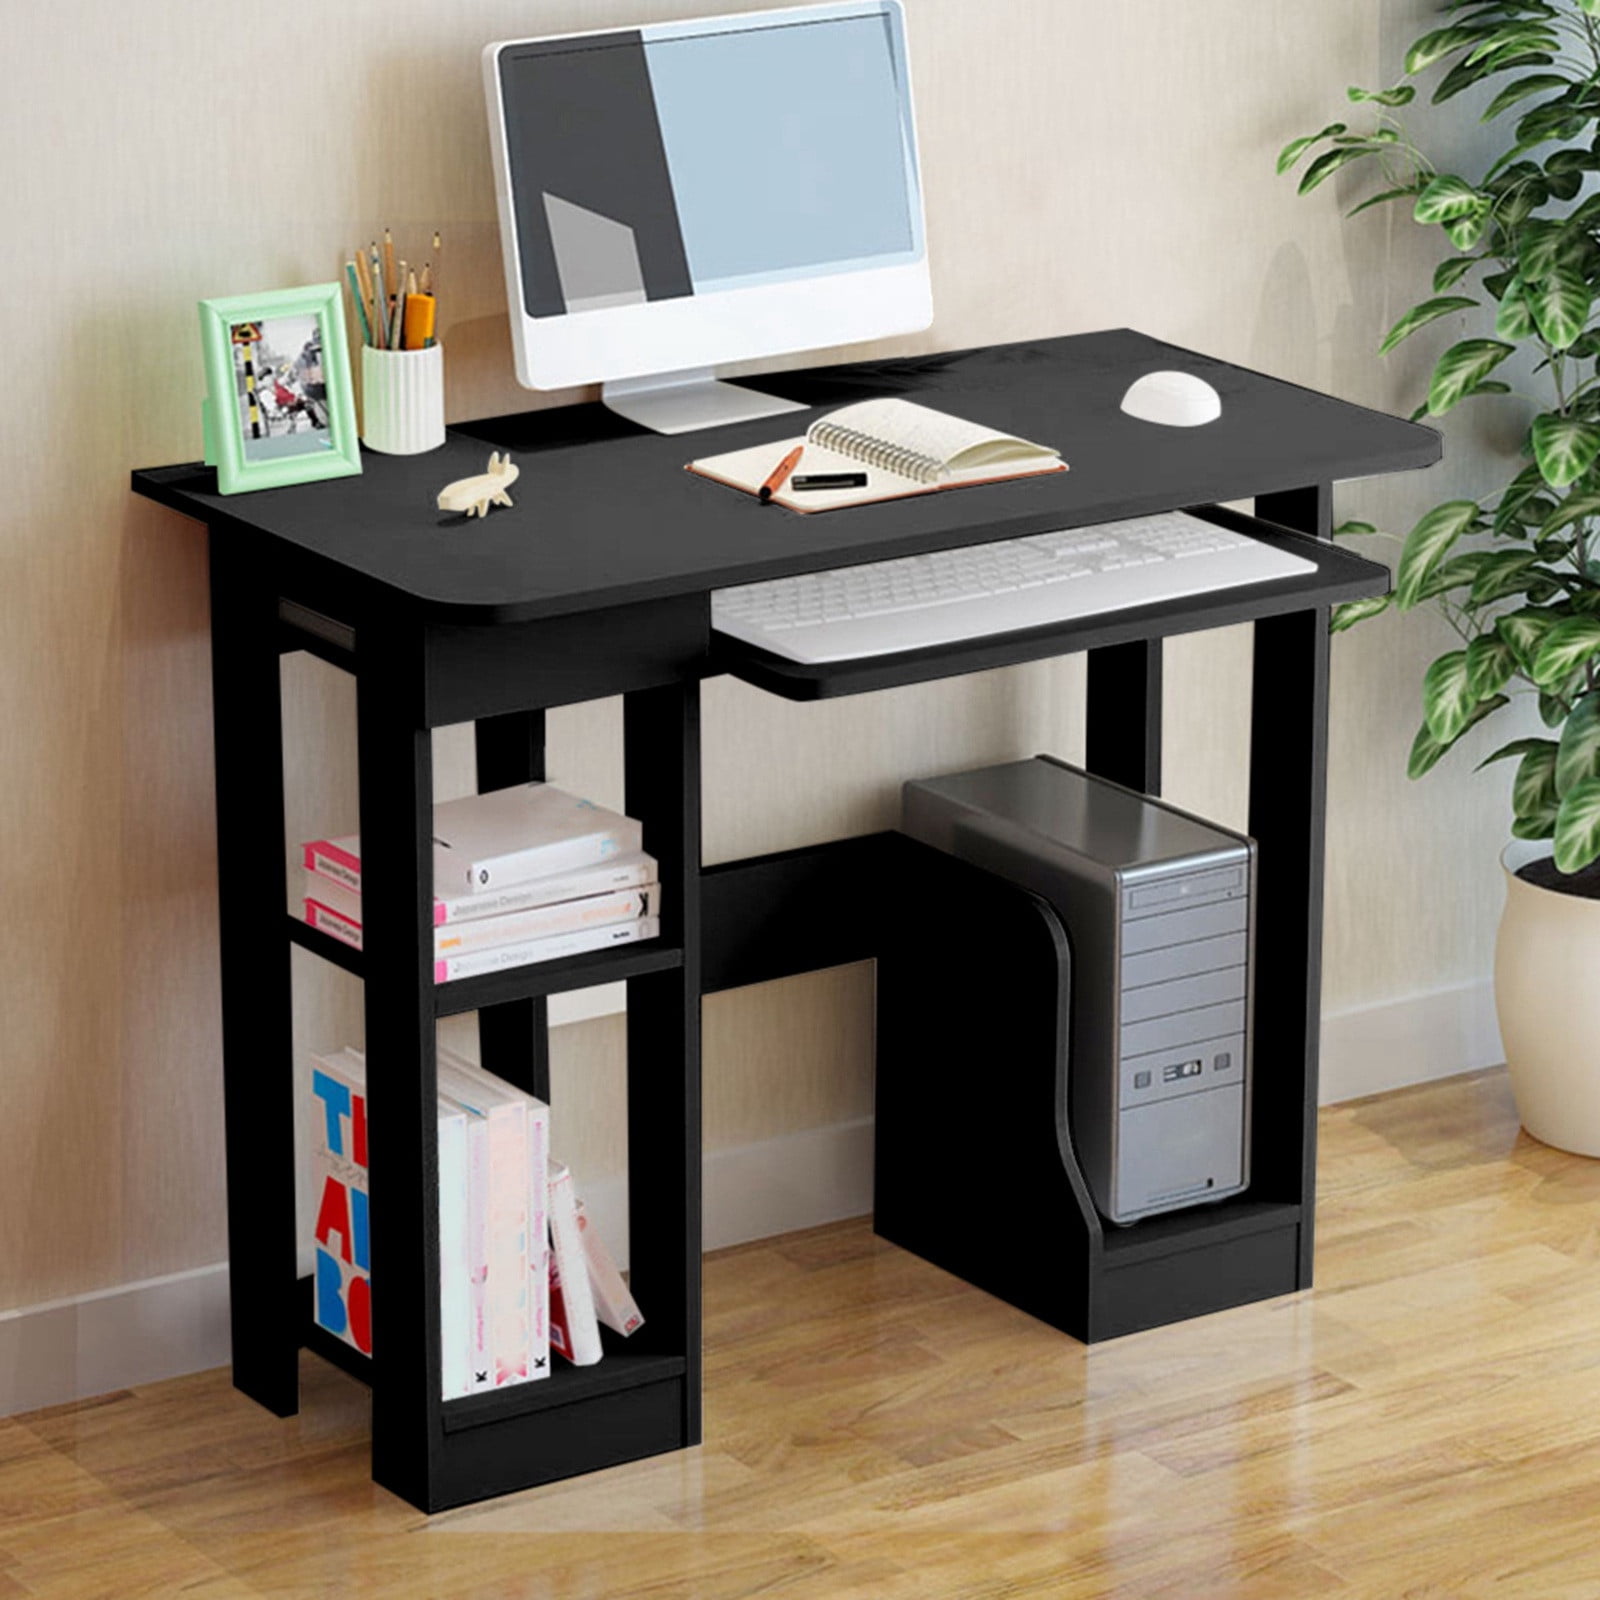 Details about   Computer Desk PC Laptop Table  Workstation w/ Keyboard Tray Home Office Study US 